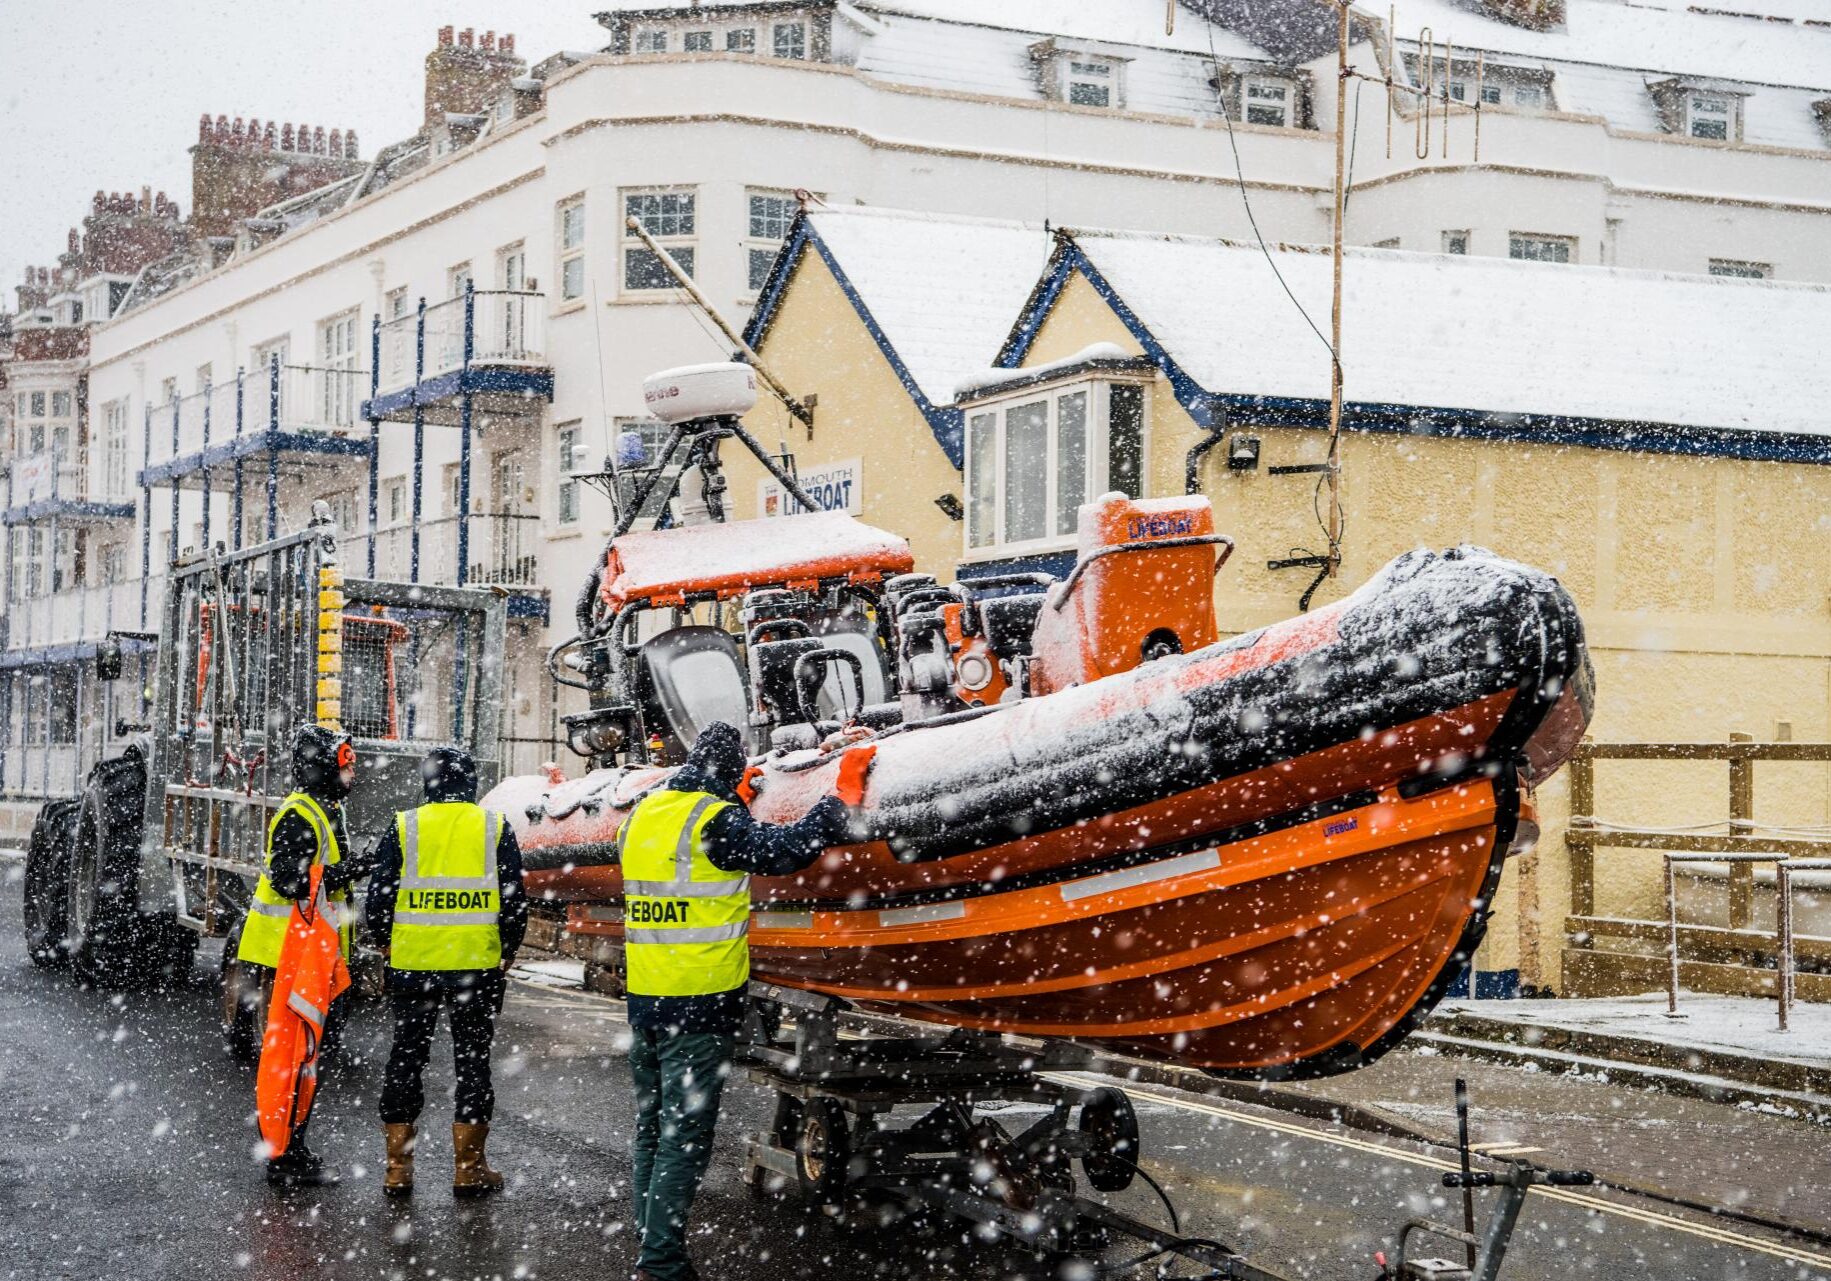 Sidmouth Lifeboat in the snow on turn table